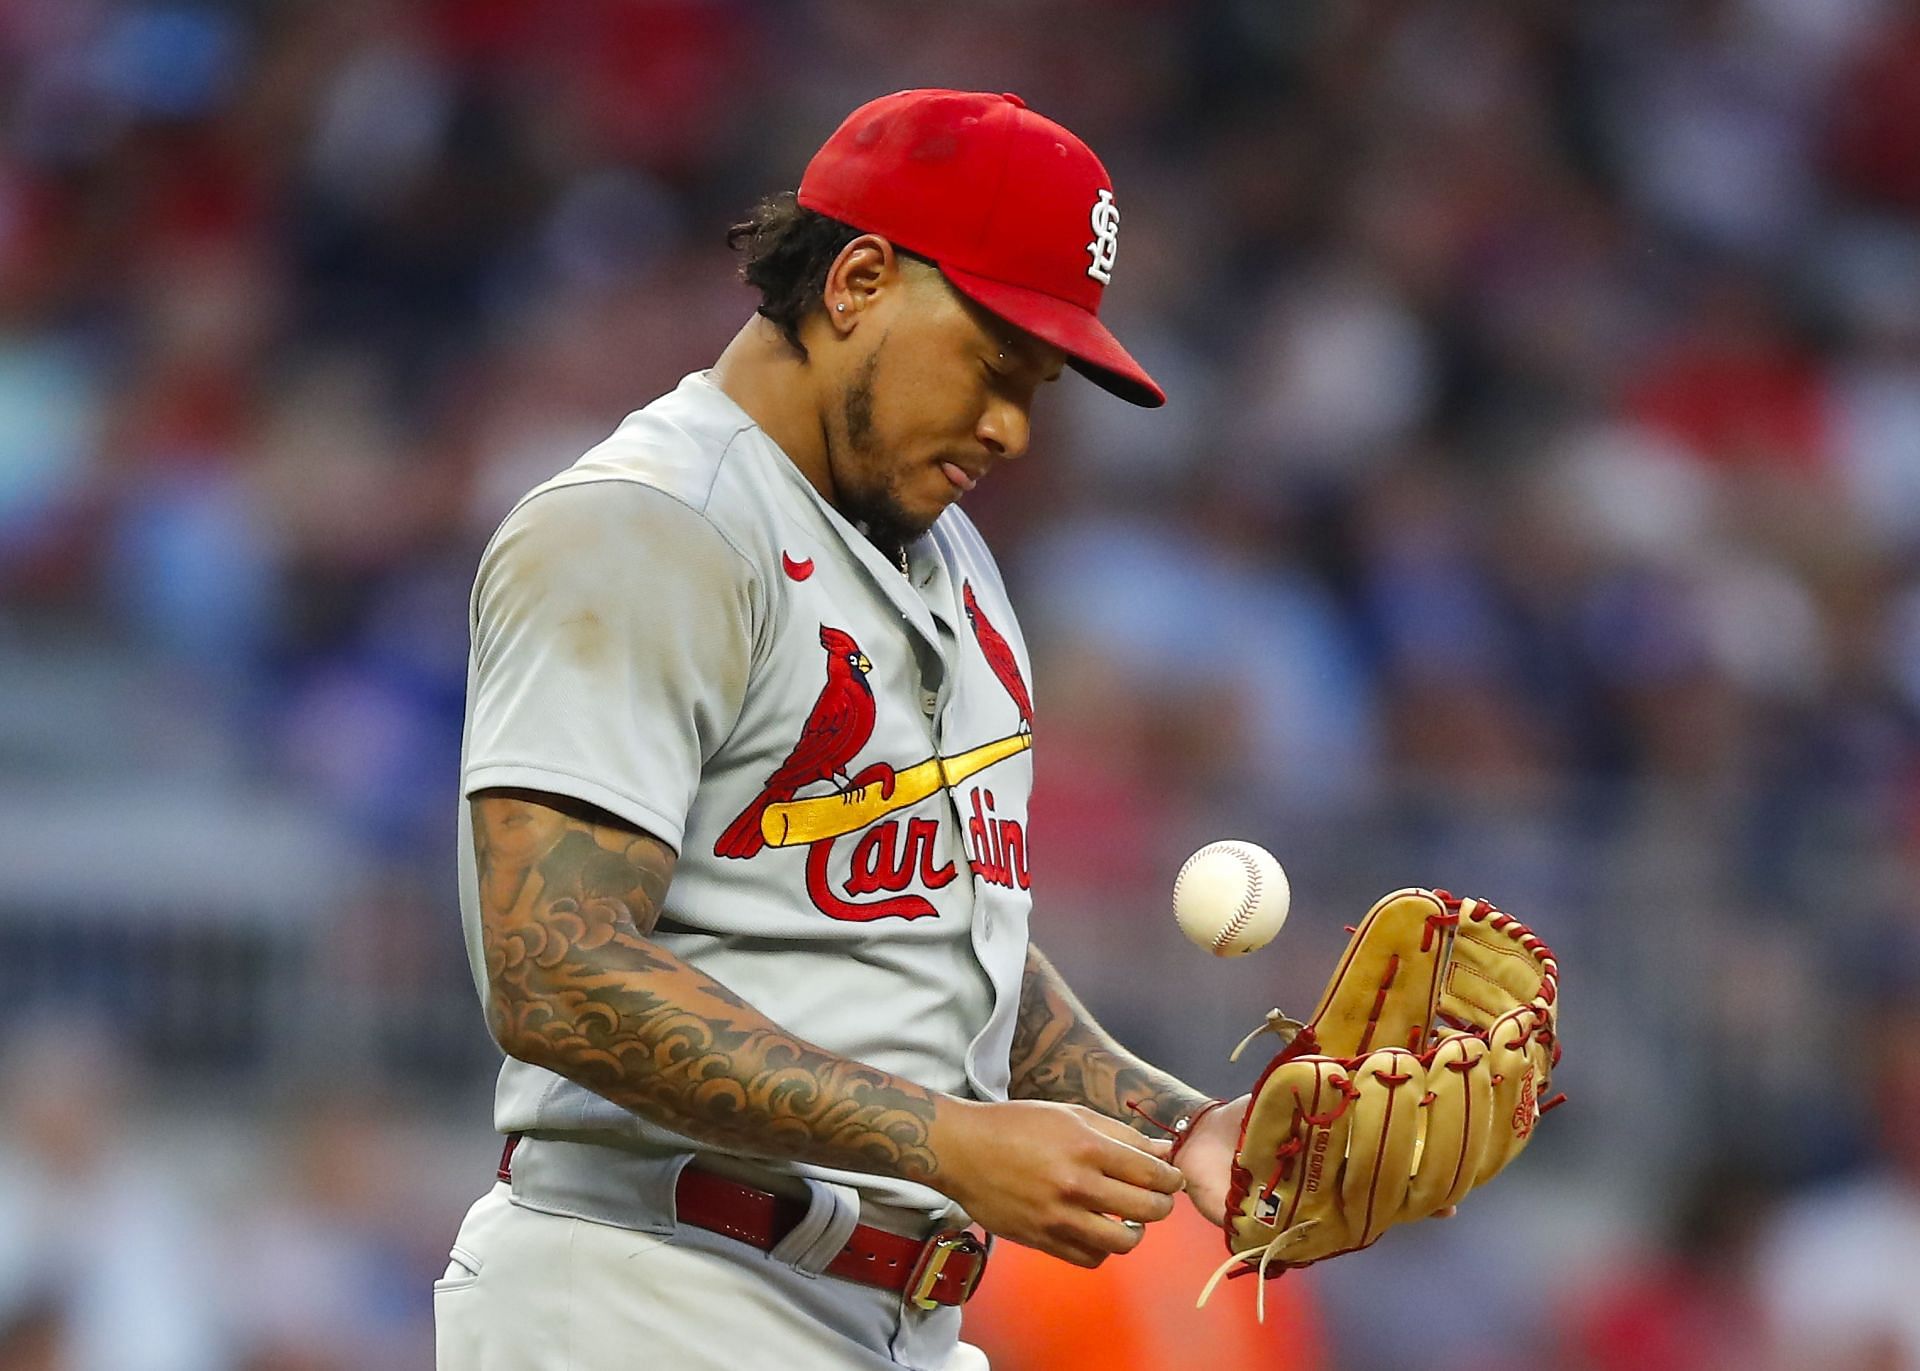 Former St. Louis Cardinals and Boston Red Sox pitcher Carlos Martinez has been suspended for 80 games by the MLB after being caught using PEDs